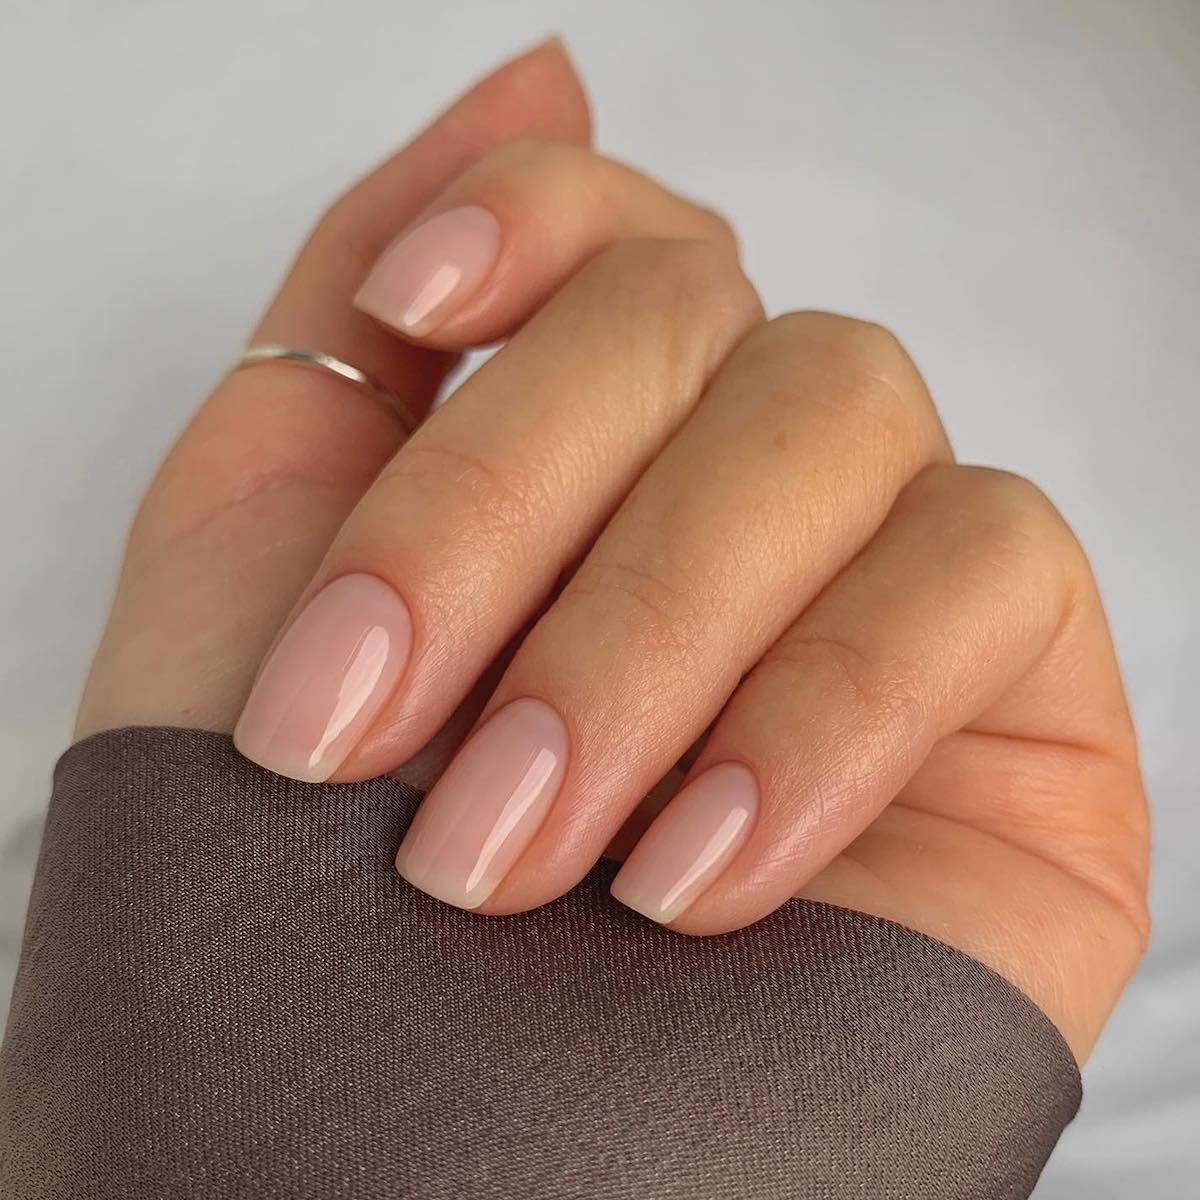 Gel-X Nails: Pros and Cons | POPSUGAR Beauty